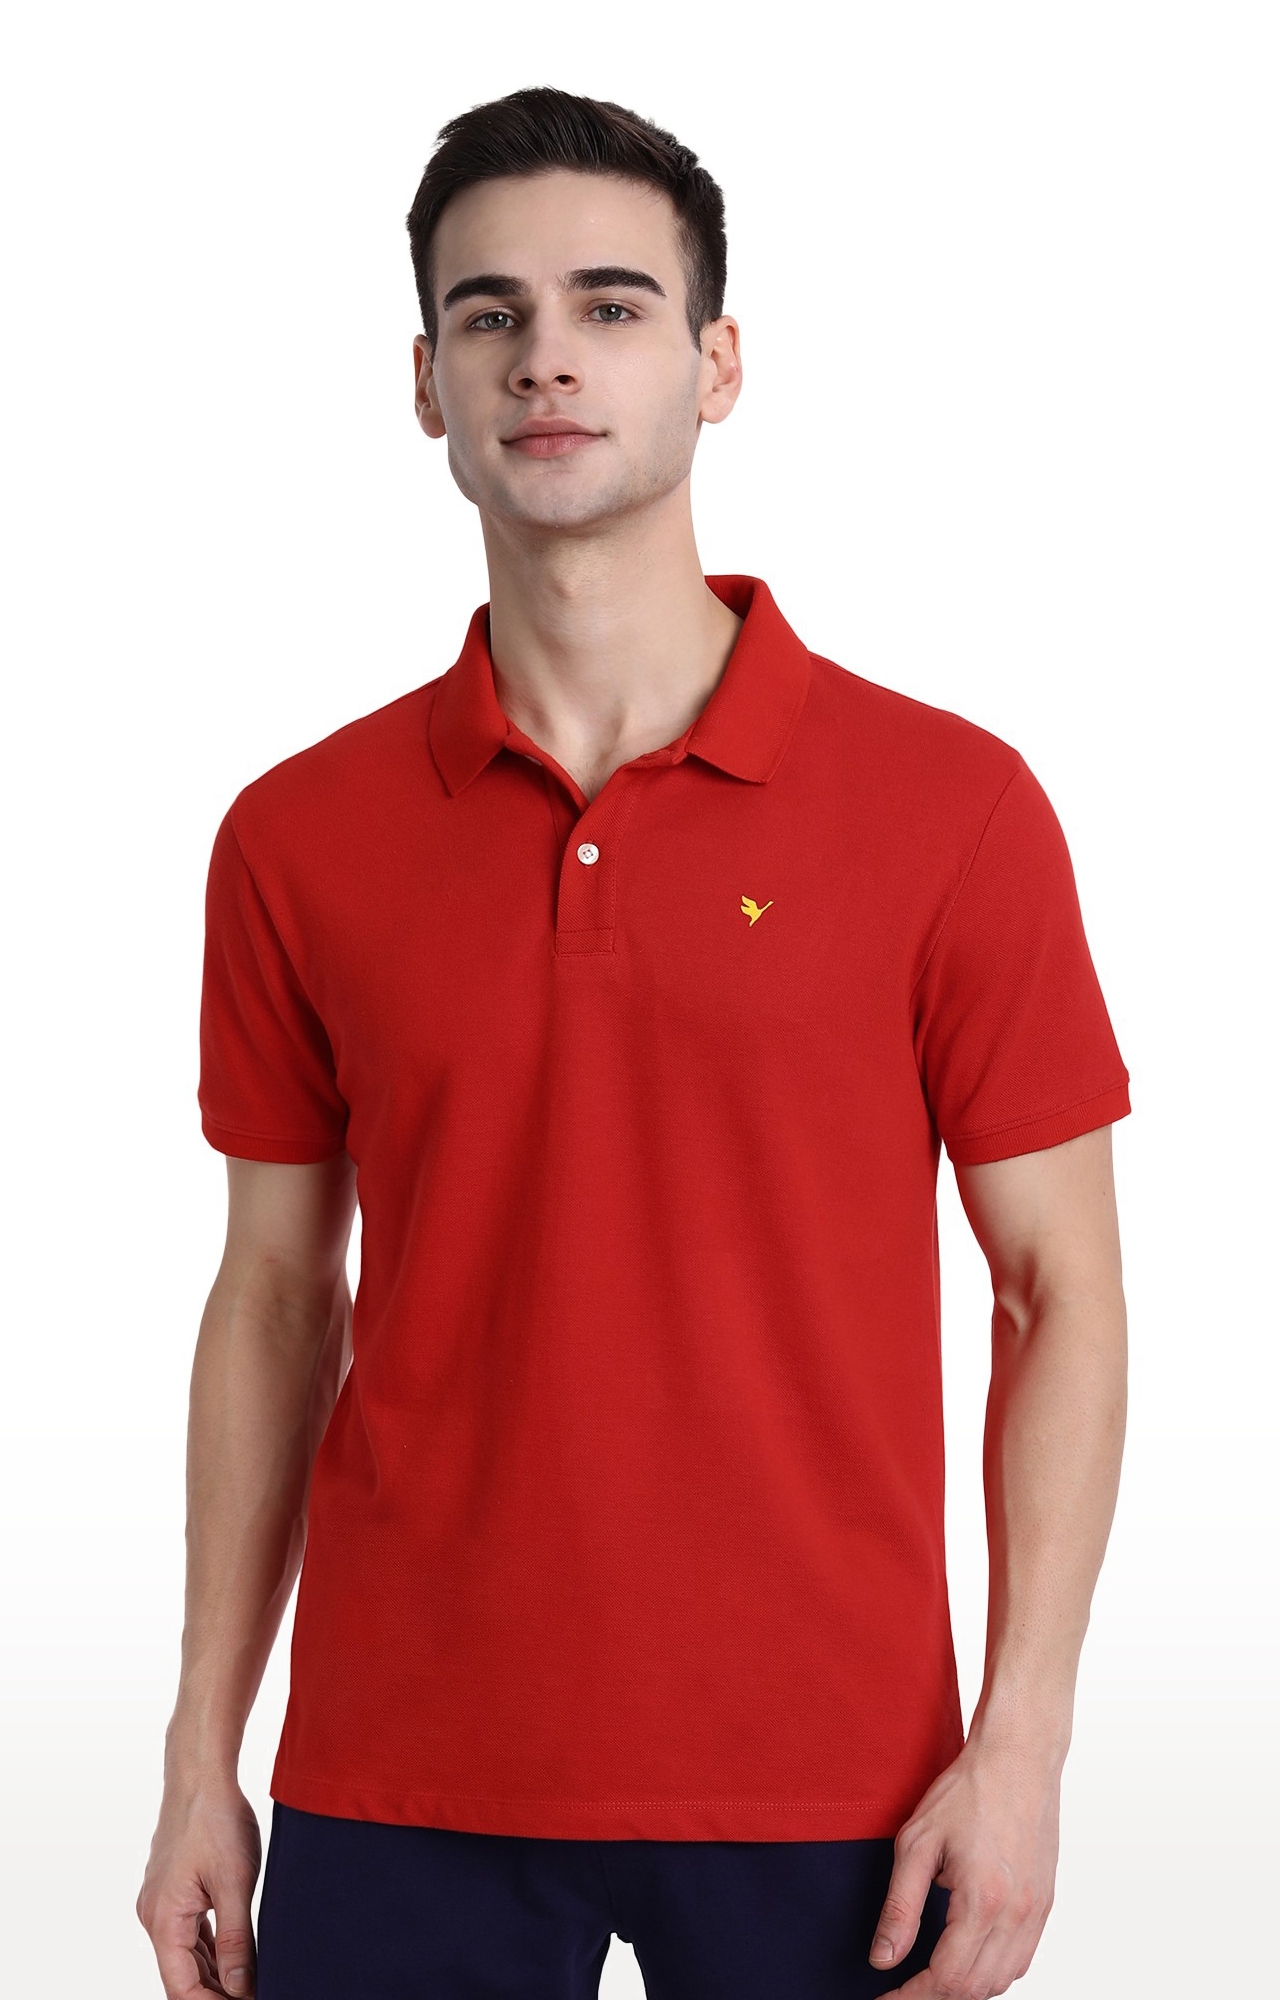 Men's Red Cotton Blend Solid Polo T-Shirt